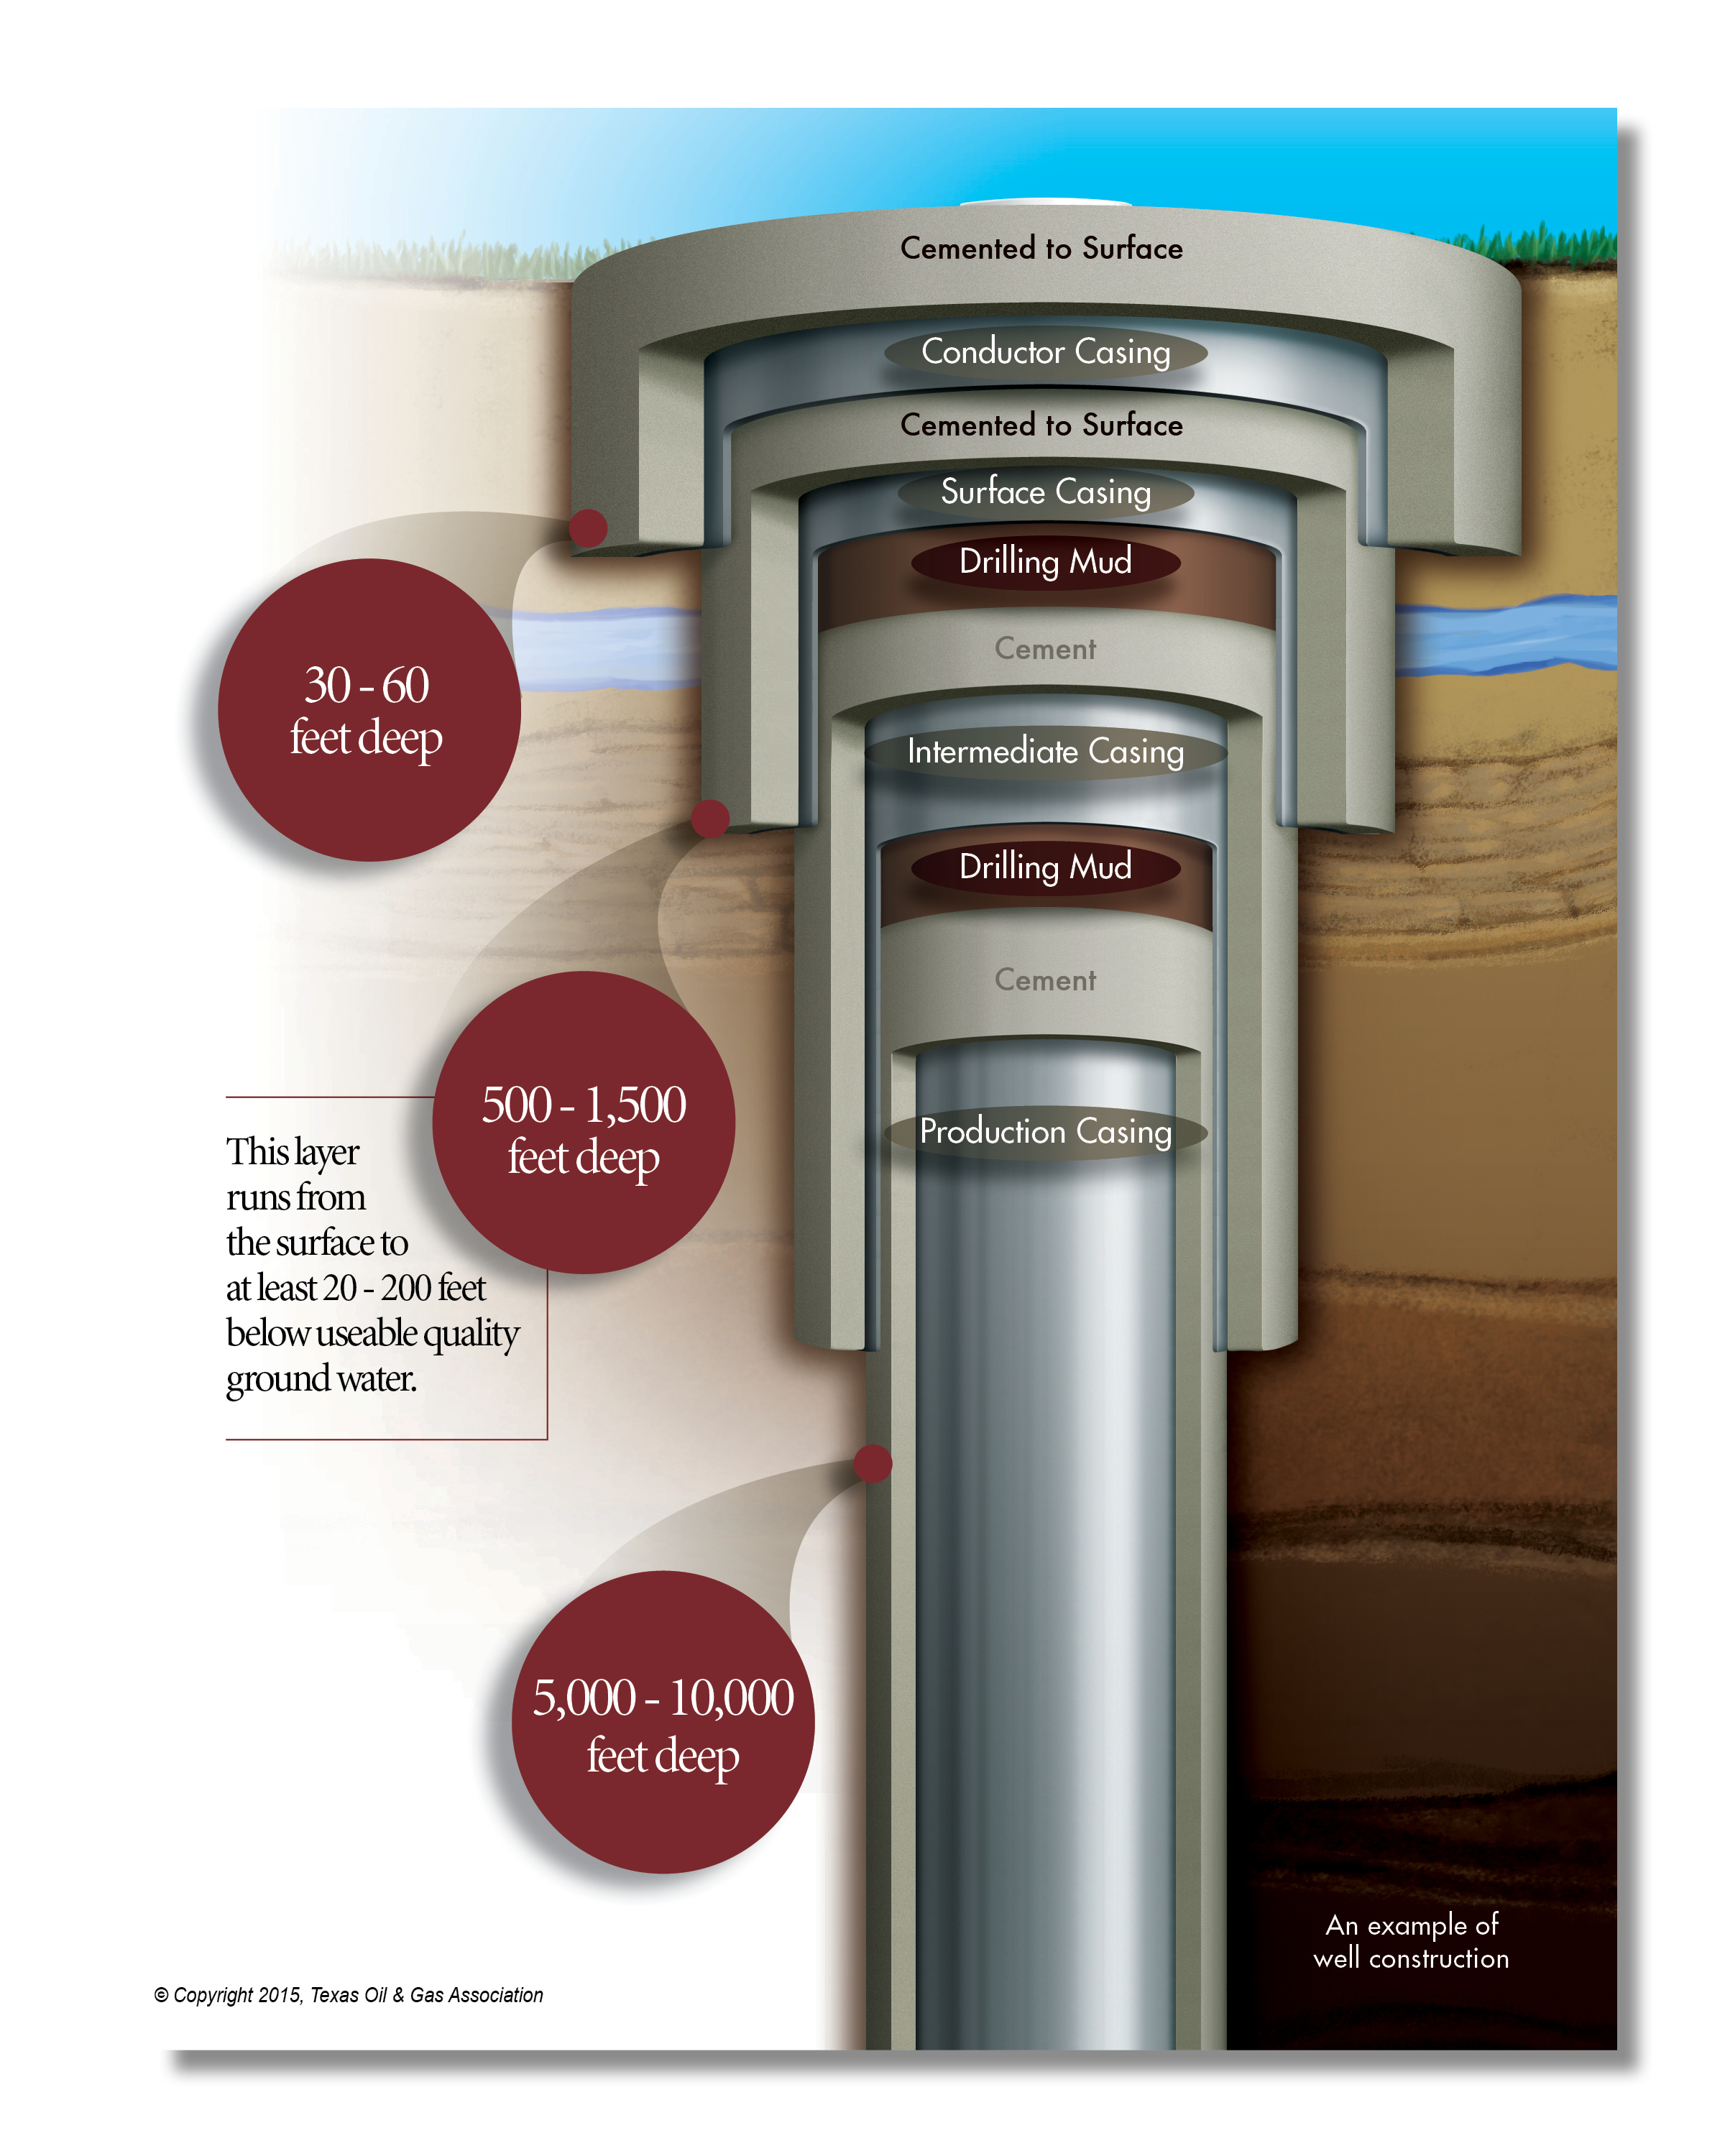 Several layers of steel casing and cement are used to prevent leaks out of or into an oil or gas well.